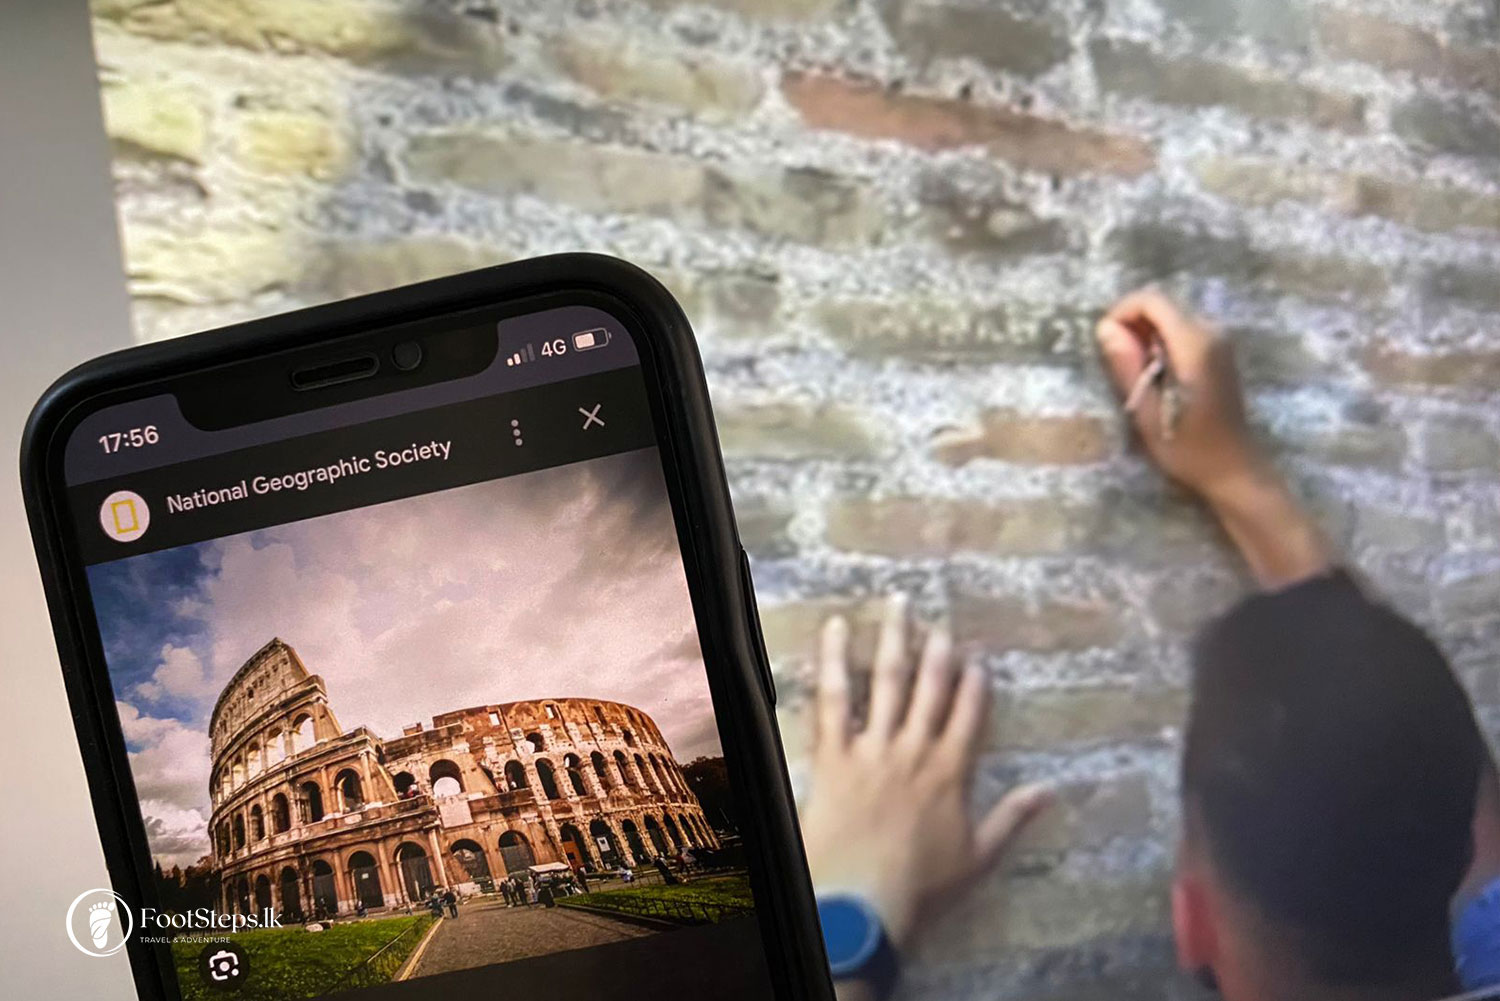 Tourist who allegedly carved names into Rome’s Colosseum says he didn’t know the ‘antiquity of the monument’